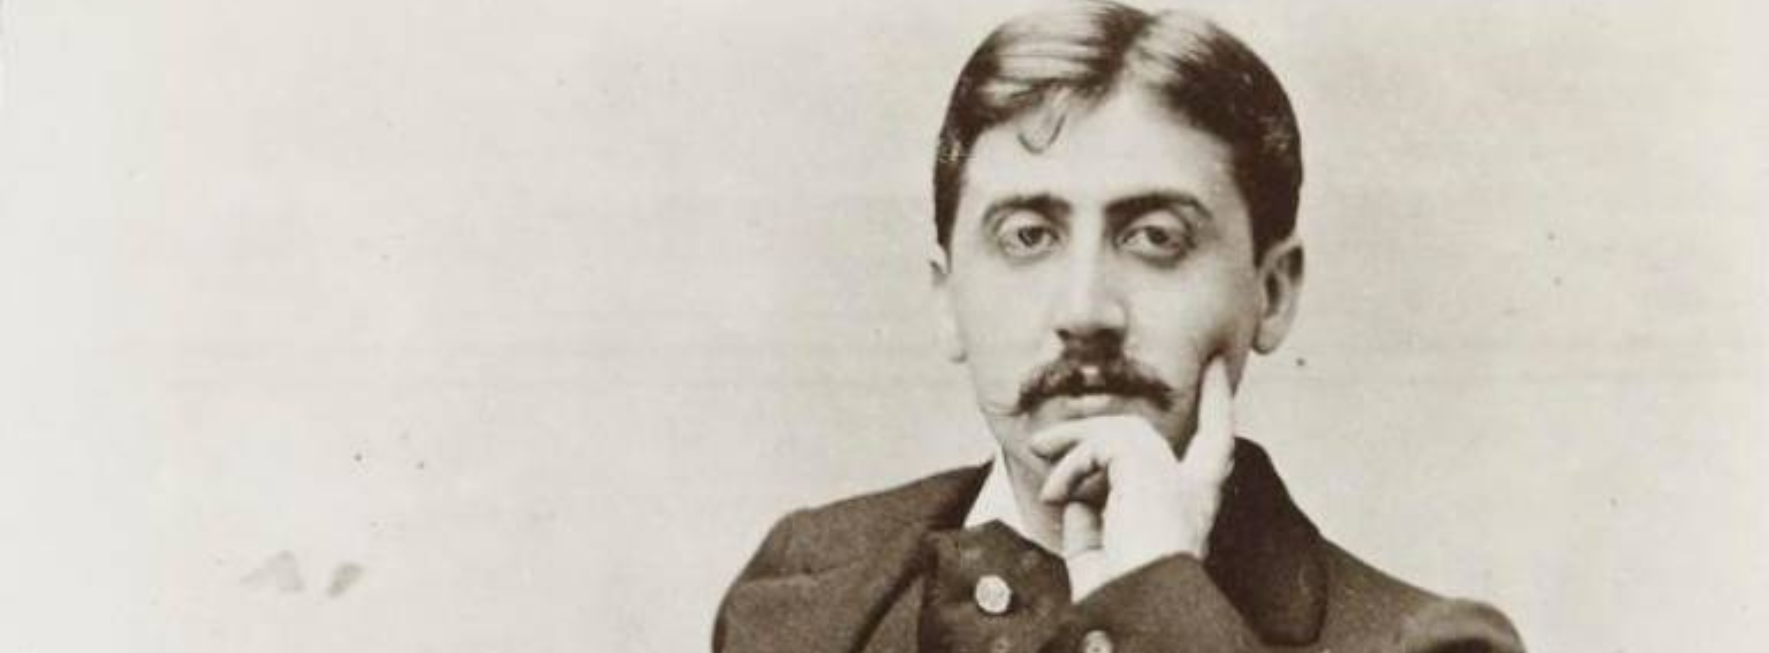 Marcel Proust looks to the camera, his chin in his hands. He is dressed in a dark suit. His hair is well-kept, slicked back with one small curl falling over his forehead. 